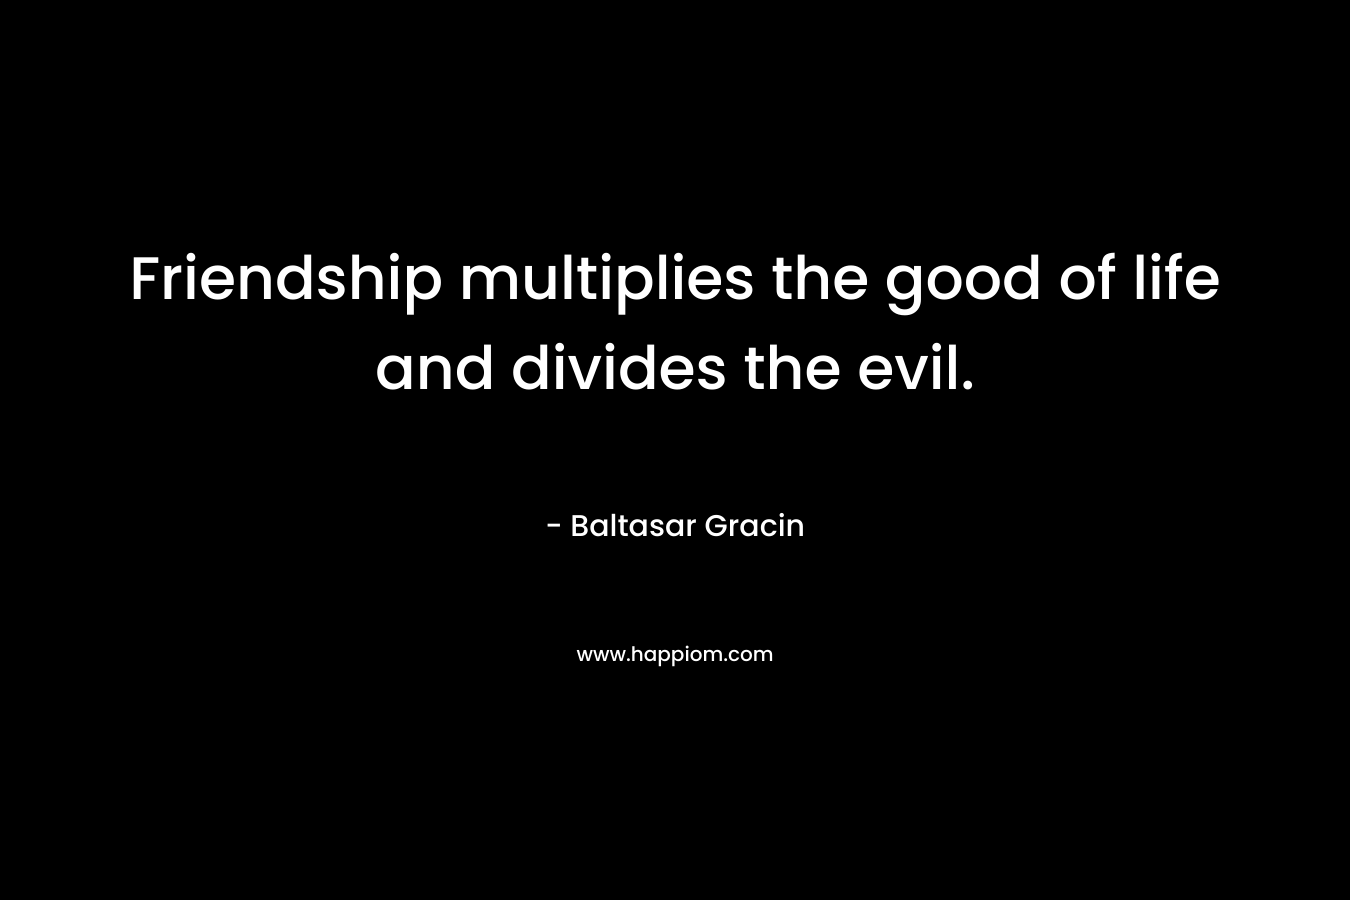 Friendship multiplies the good of life and divides the evil. – Baltasar Gracin